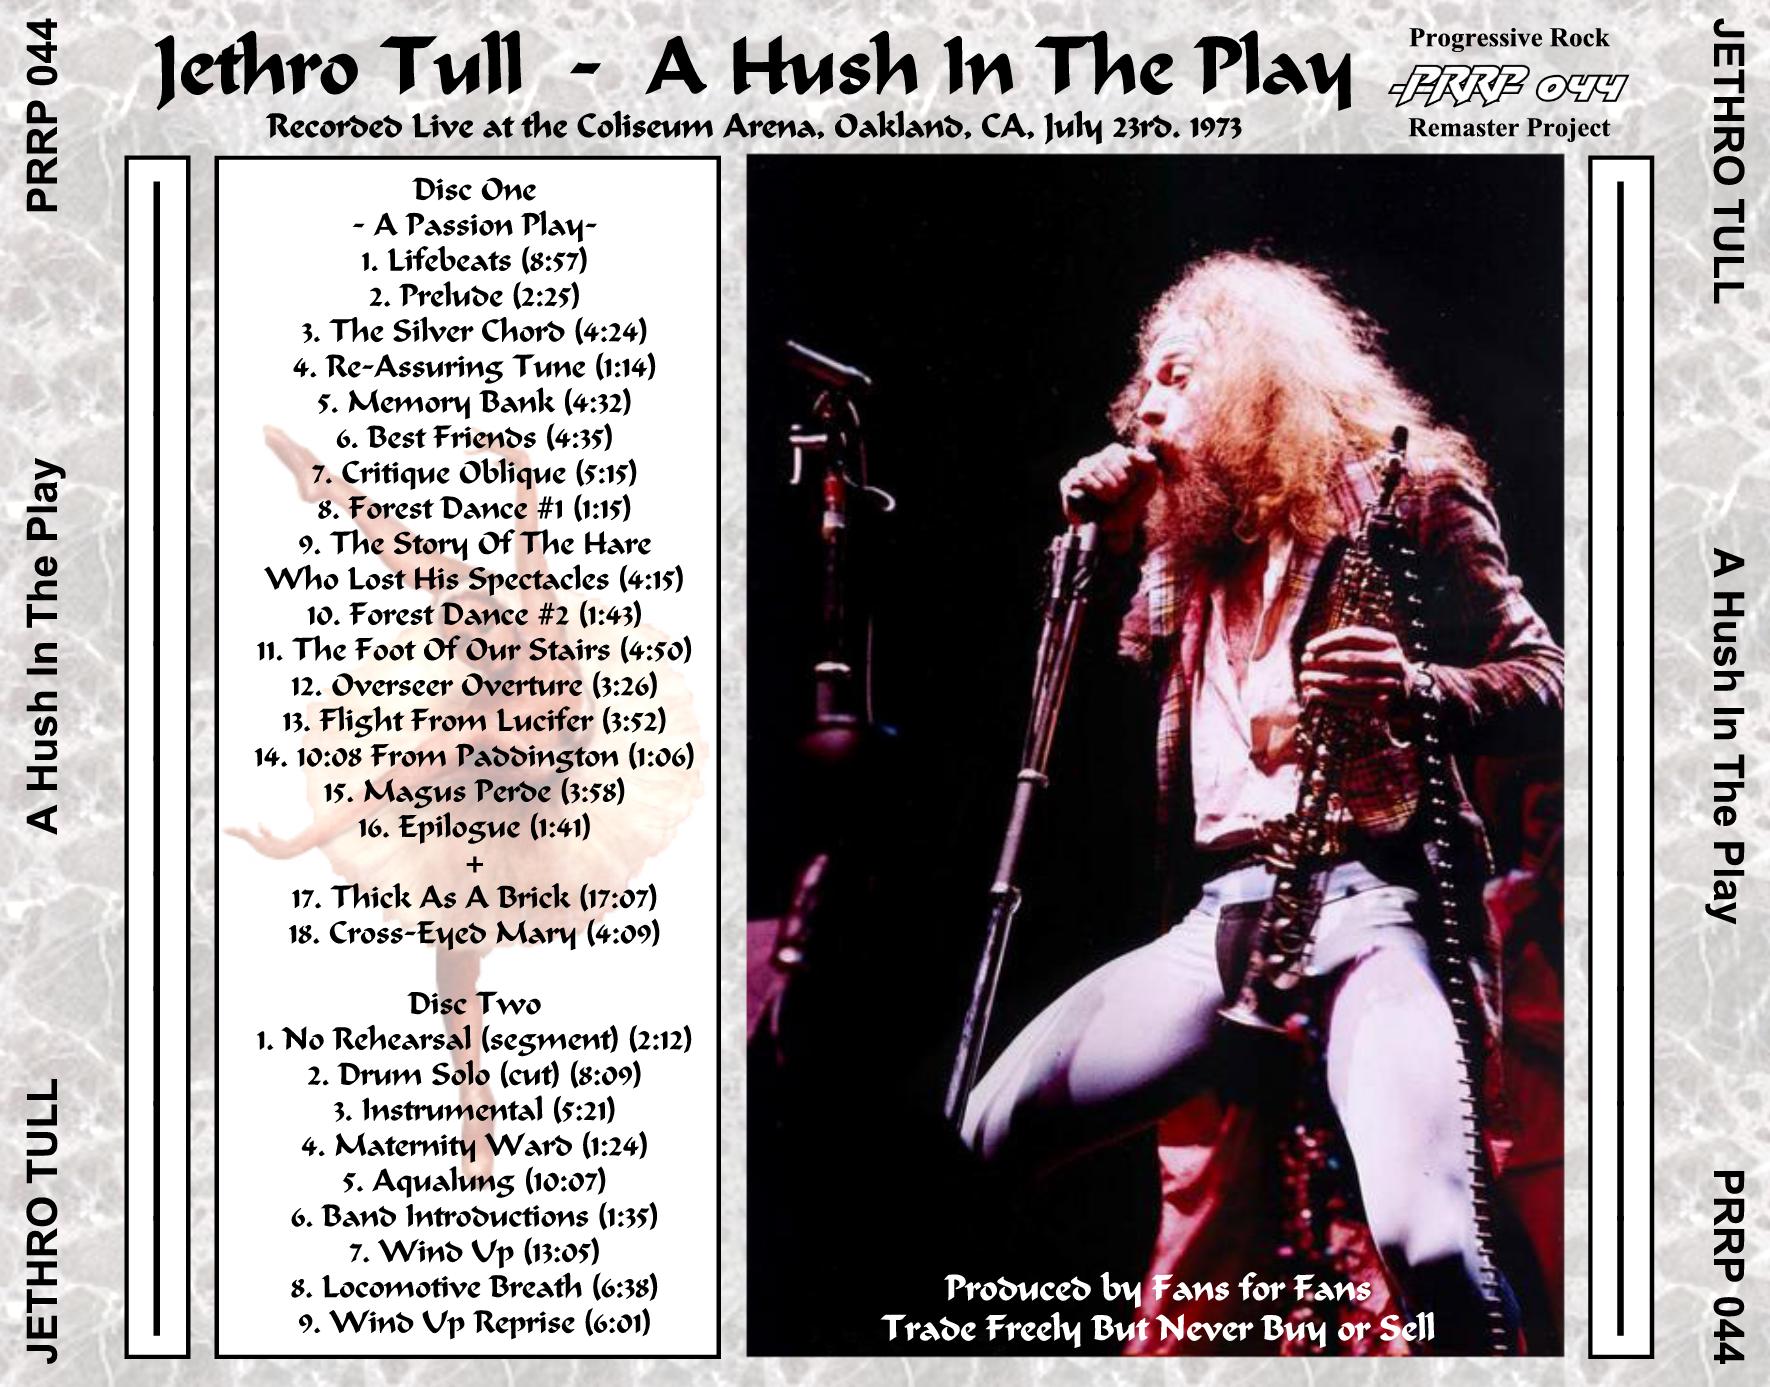 1973-07-23-a_hush_in_the_play_prrp-044-back